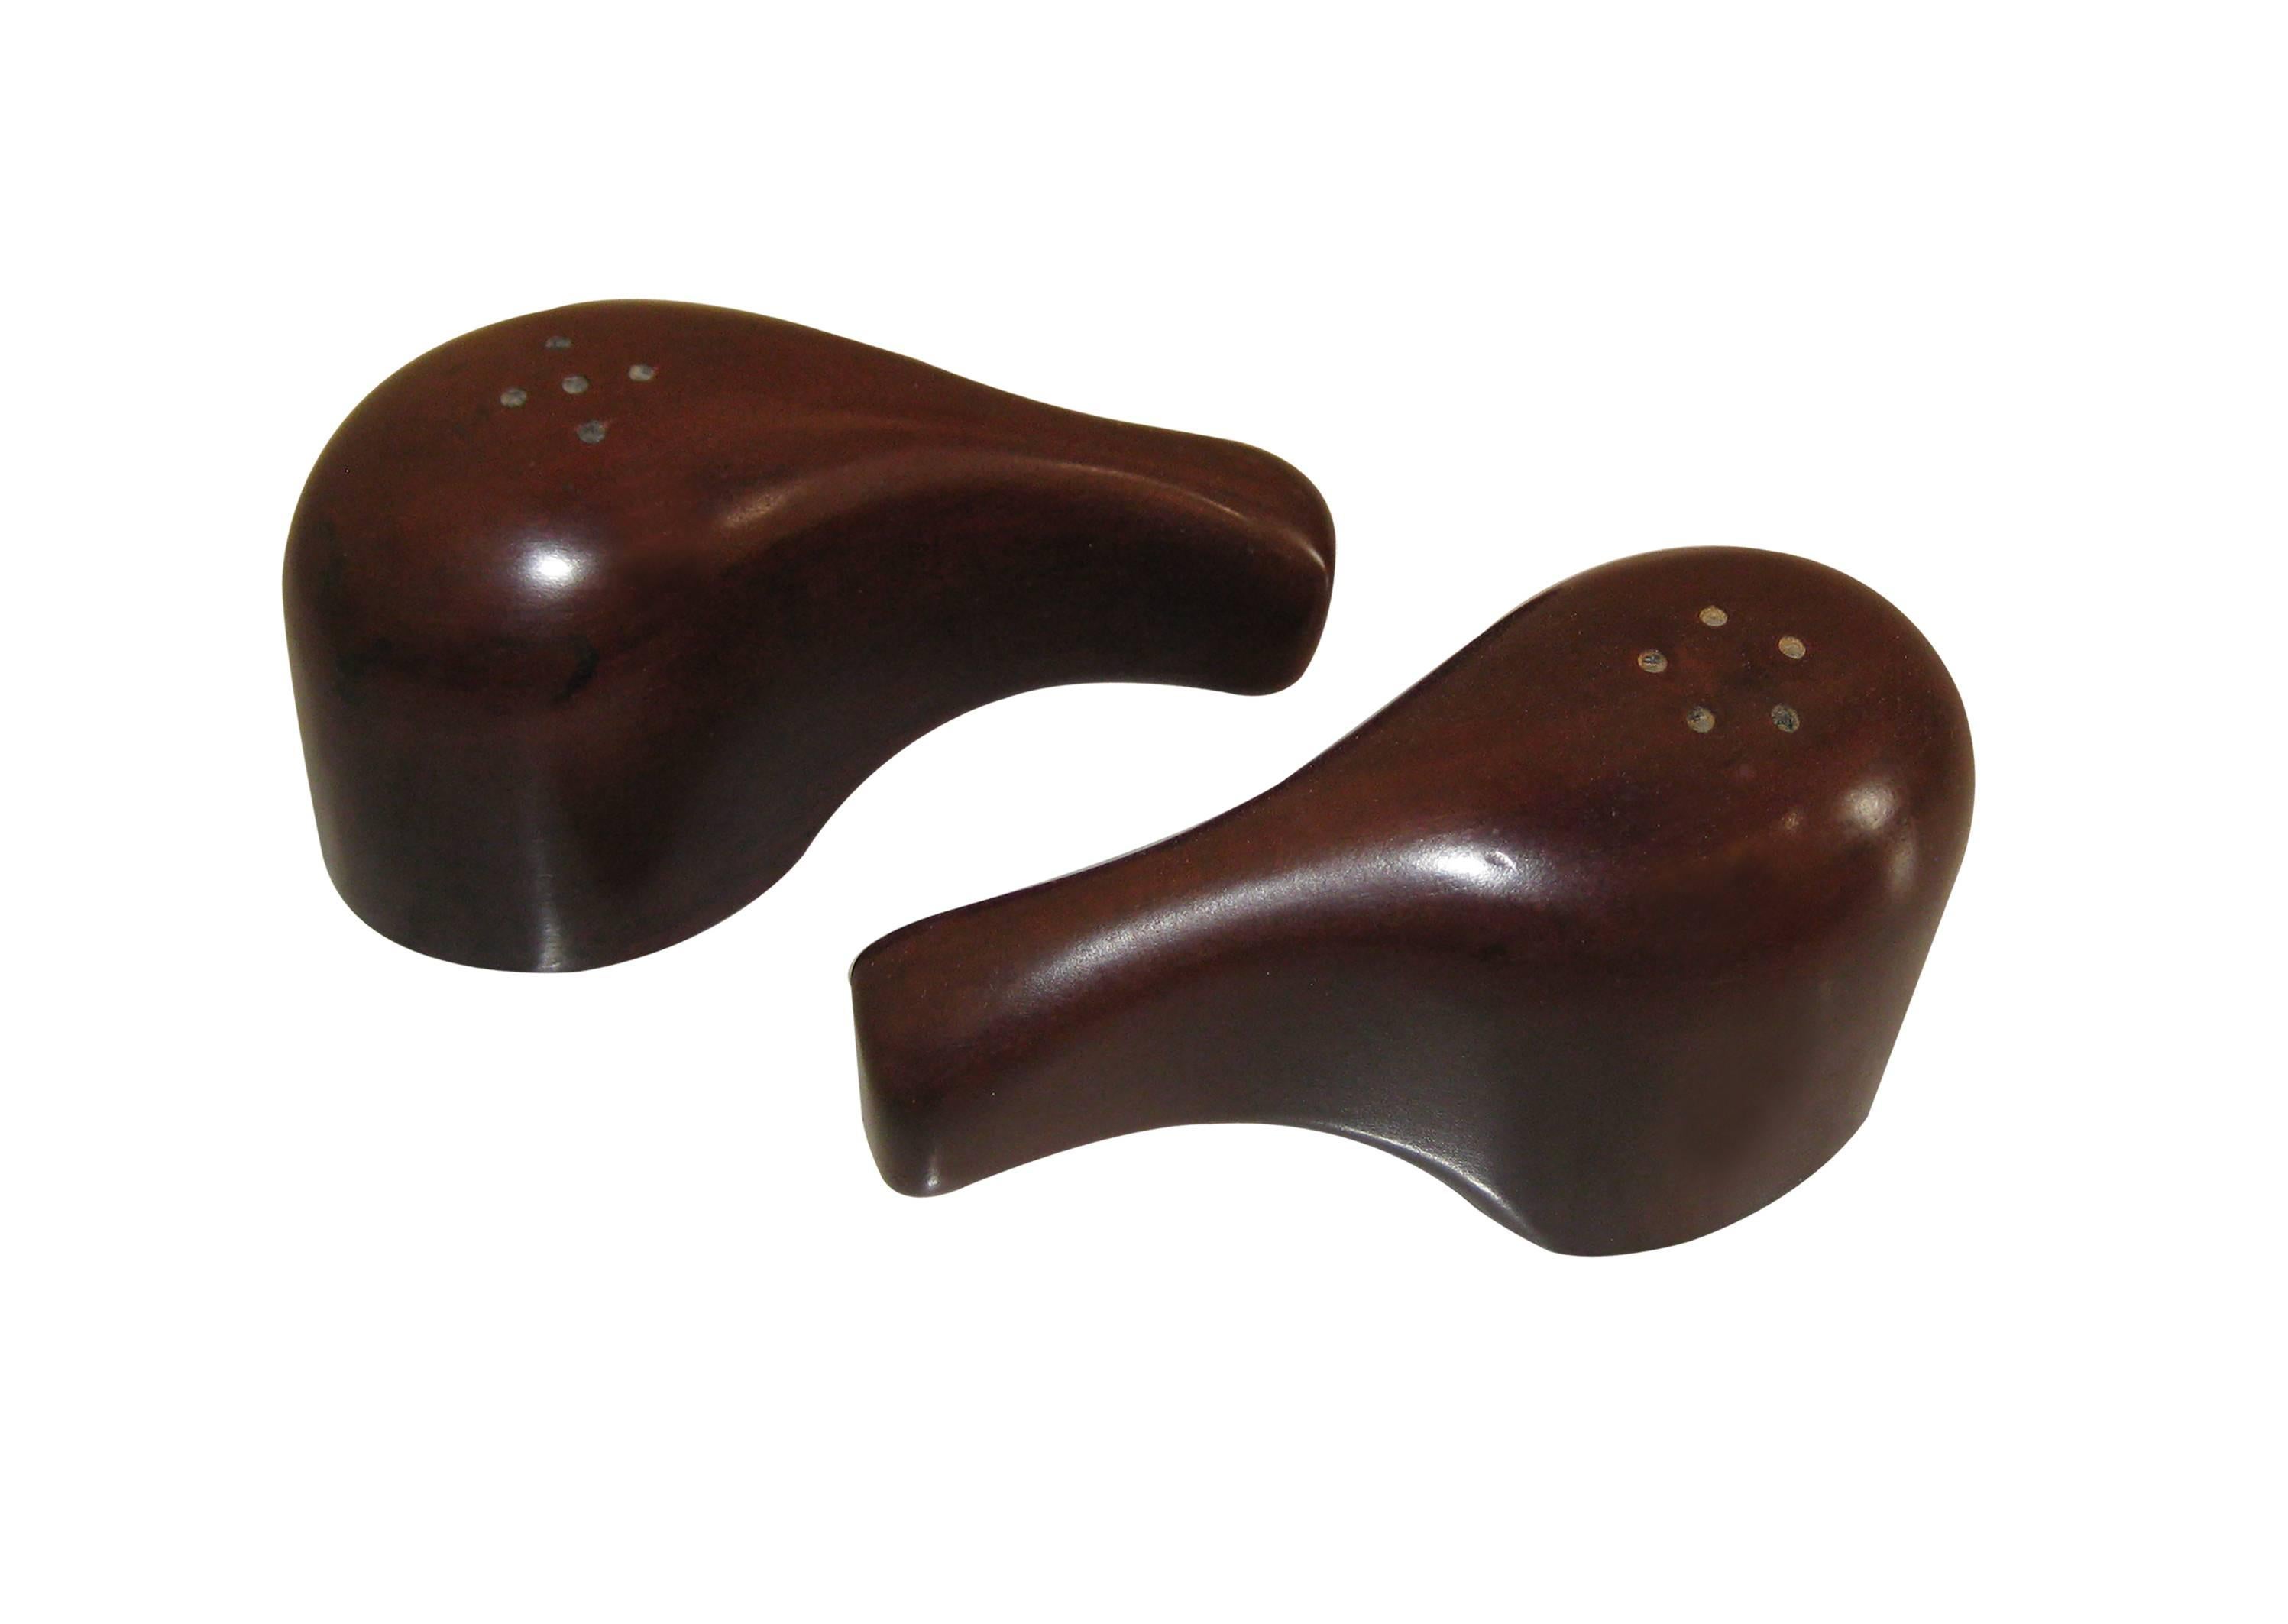 The smooth silhouettes of these salt-and-pepper shakers are both elegant and effortless to hold. That is, they are easy on the eyes as well as on the hands! With cork stoppers and a purely organic flair. In pristine condition.

Don Shoemaker